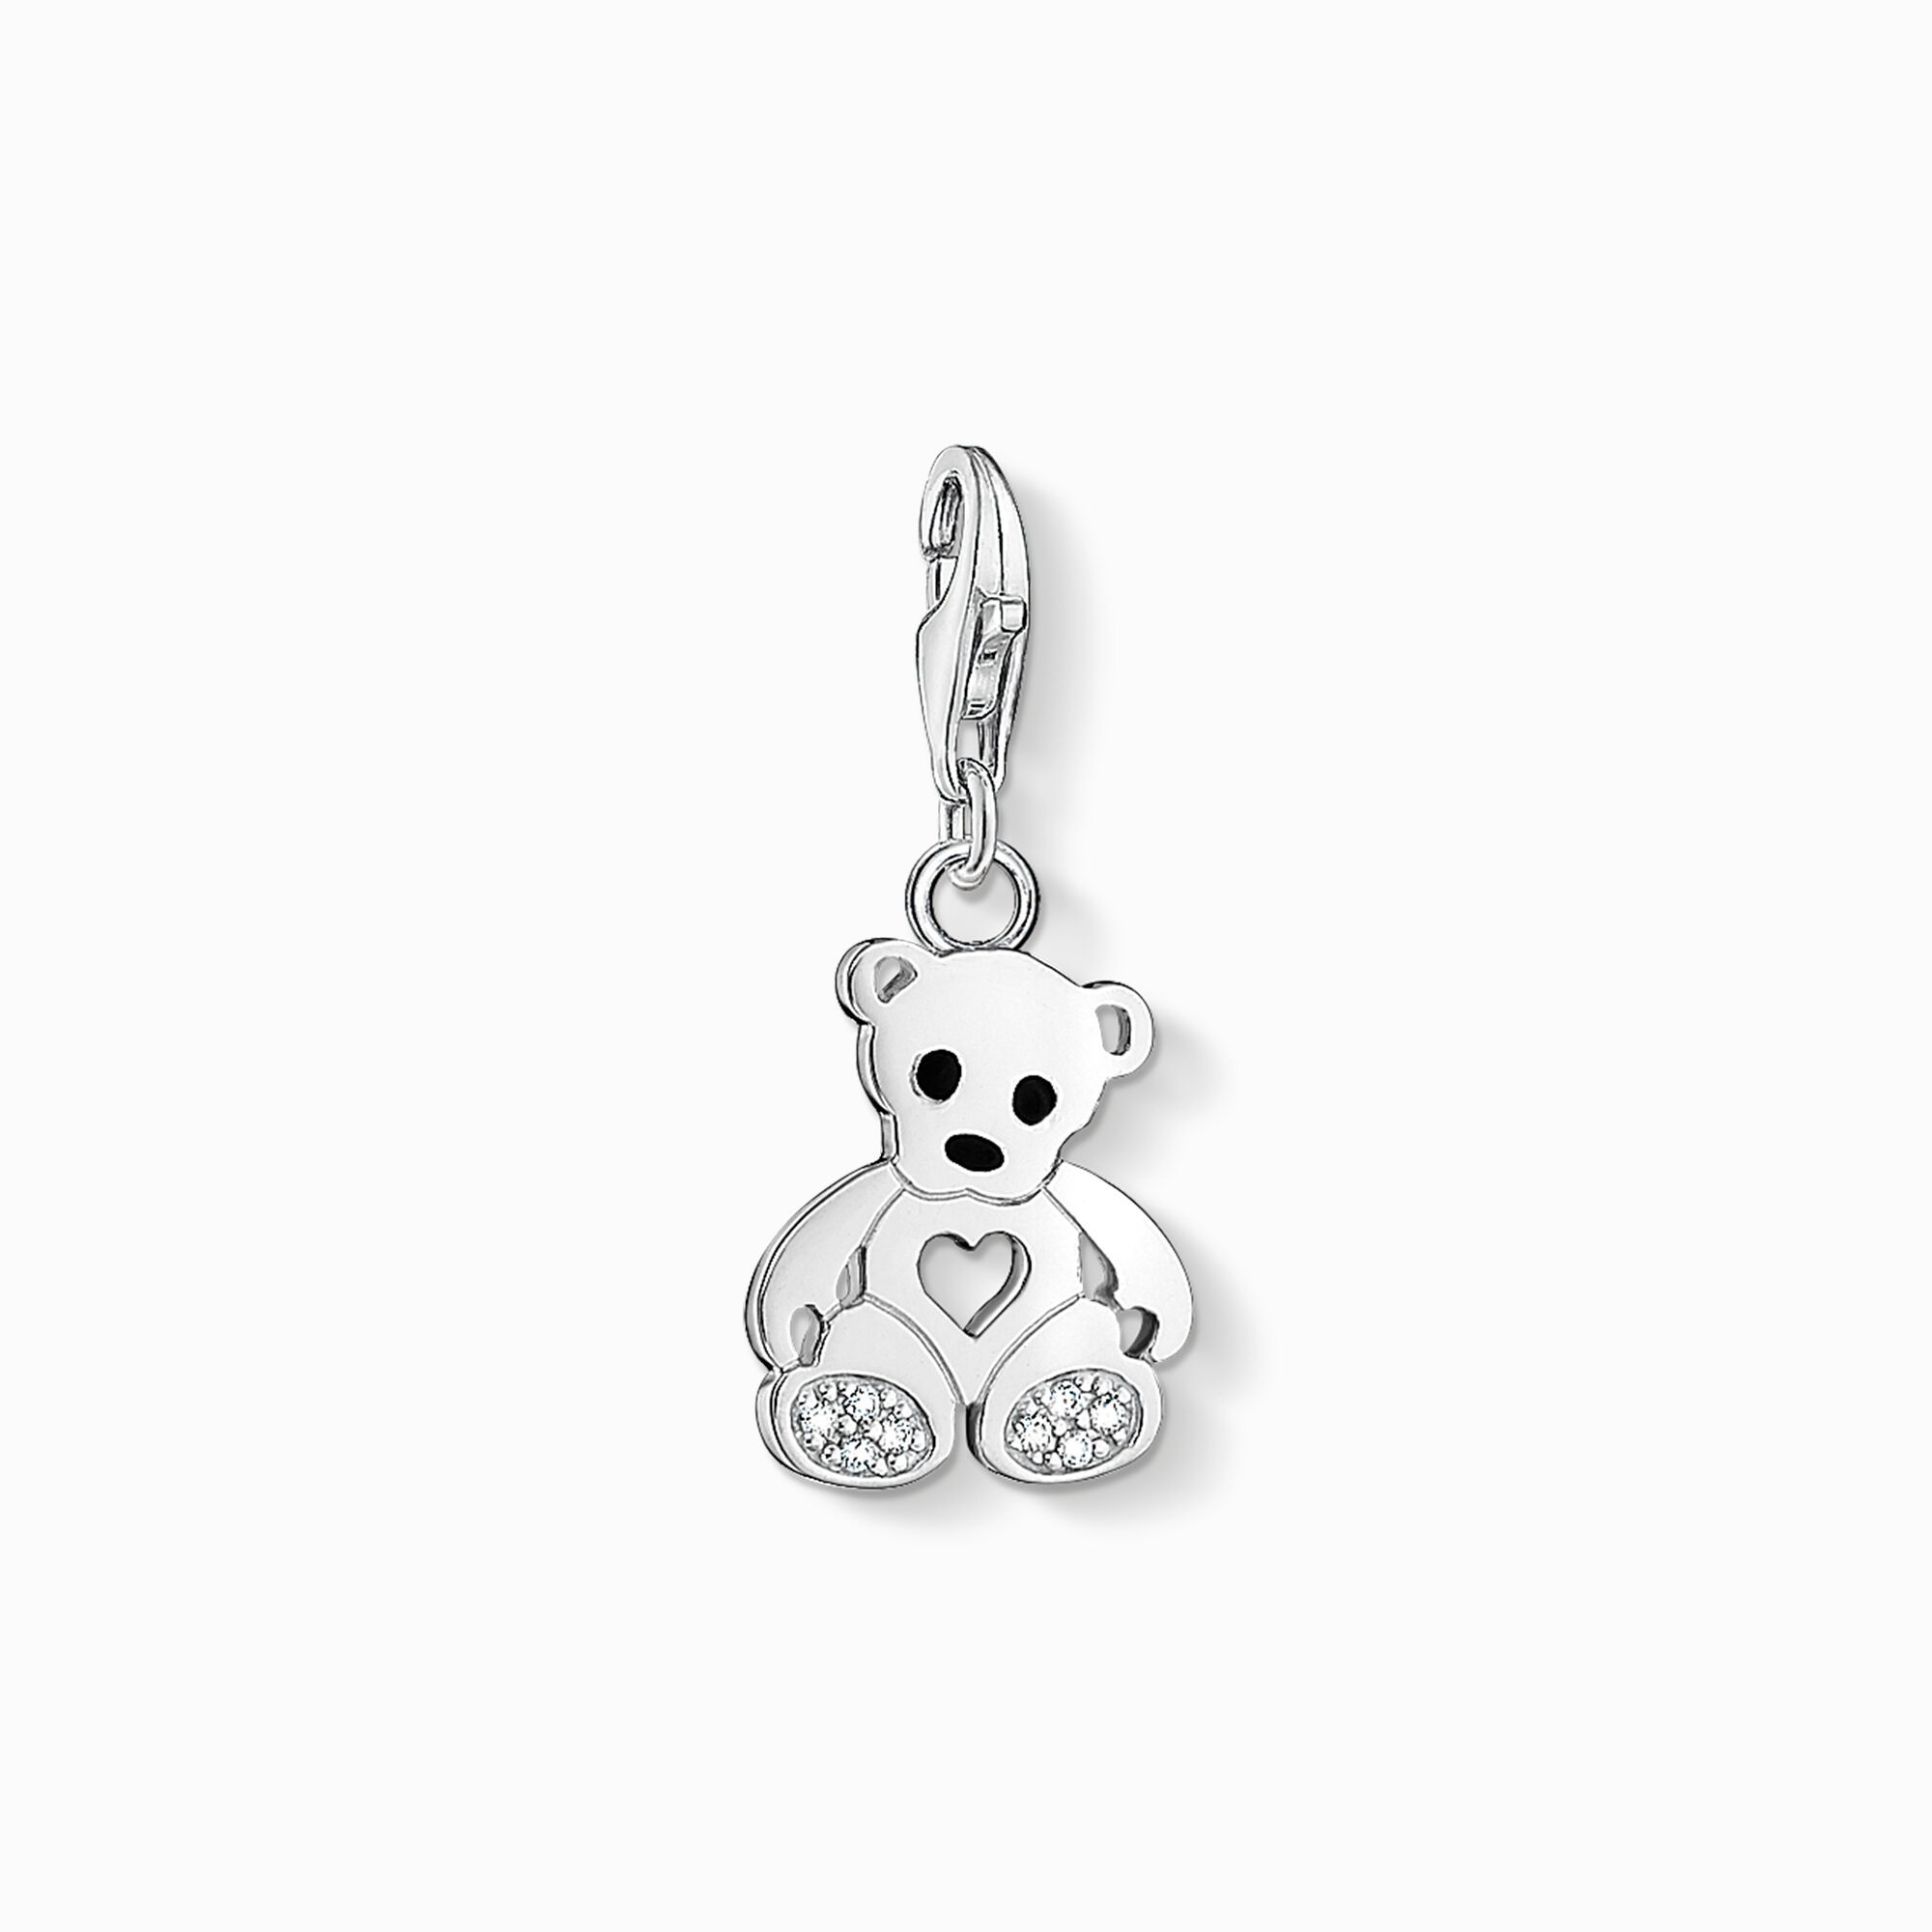 Charm pendant teddy bear with heart from the Charm Club collection in the THOMAS SABO online store